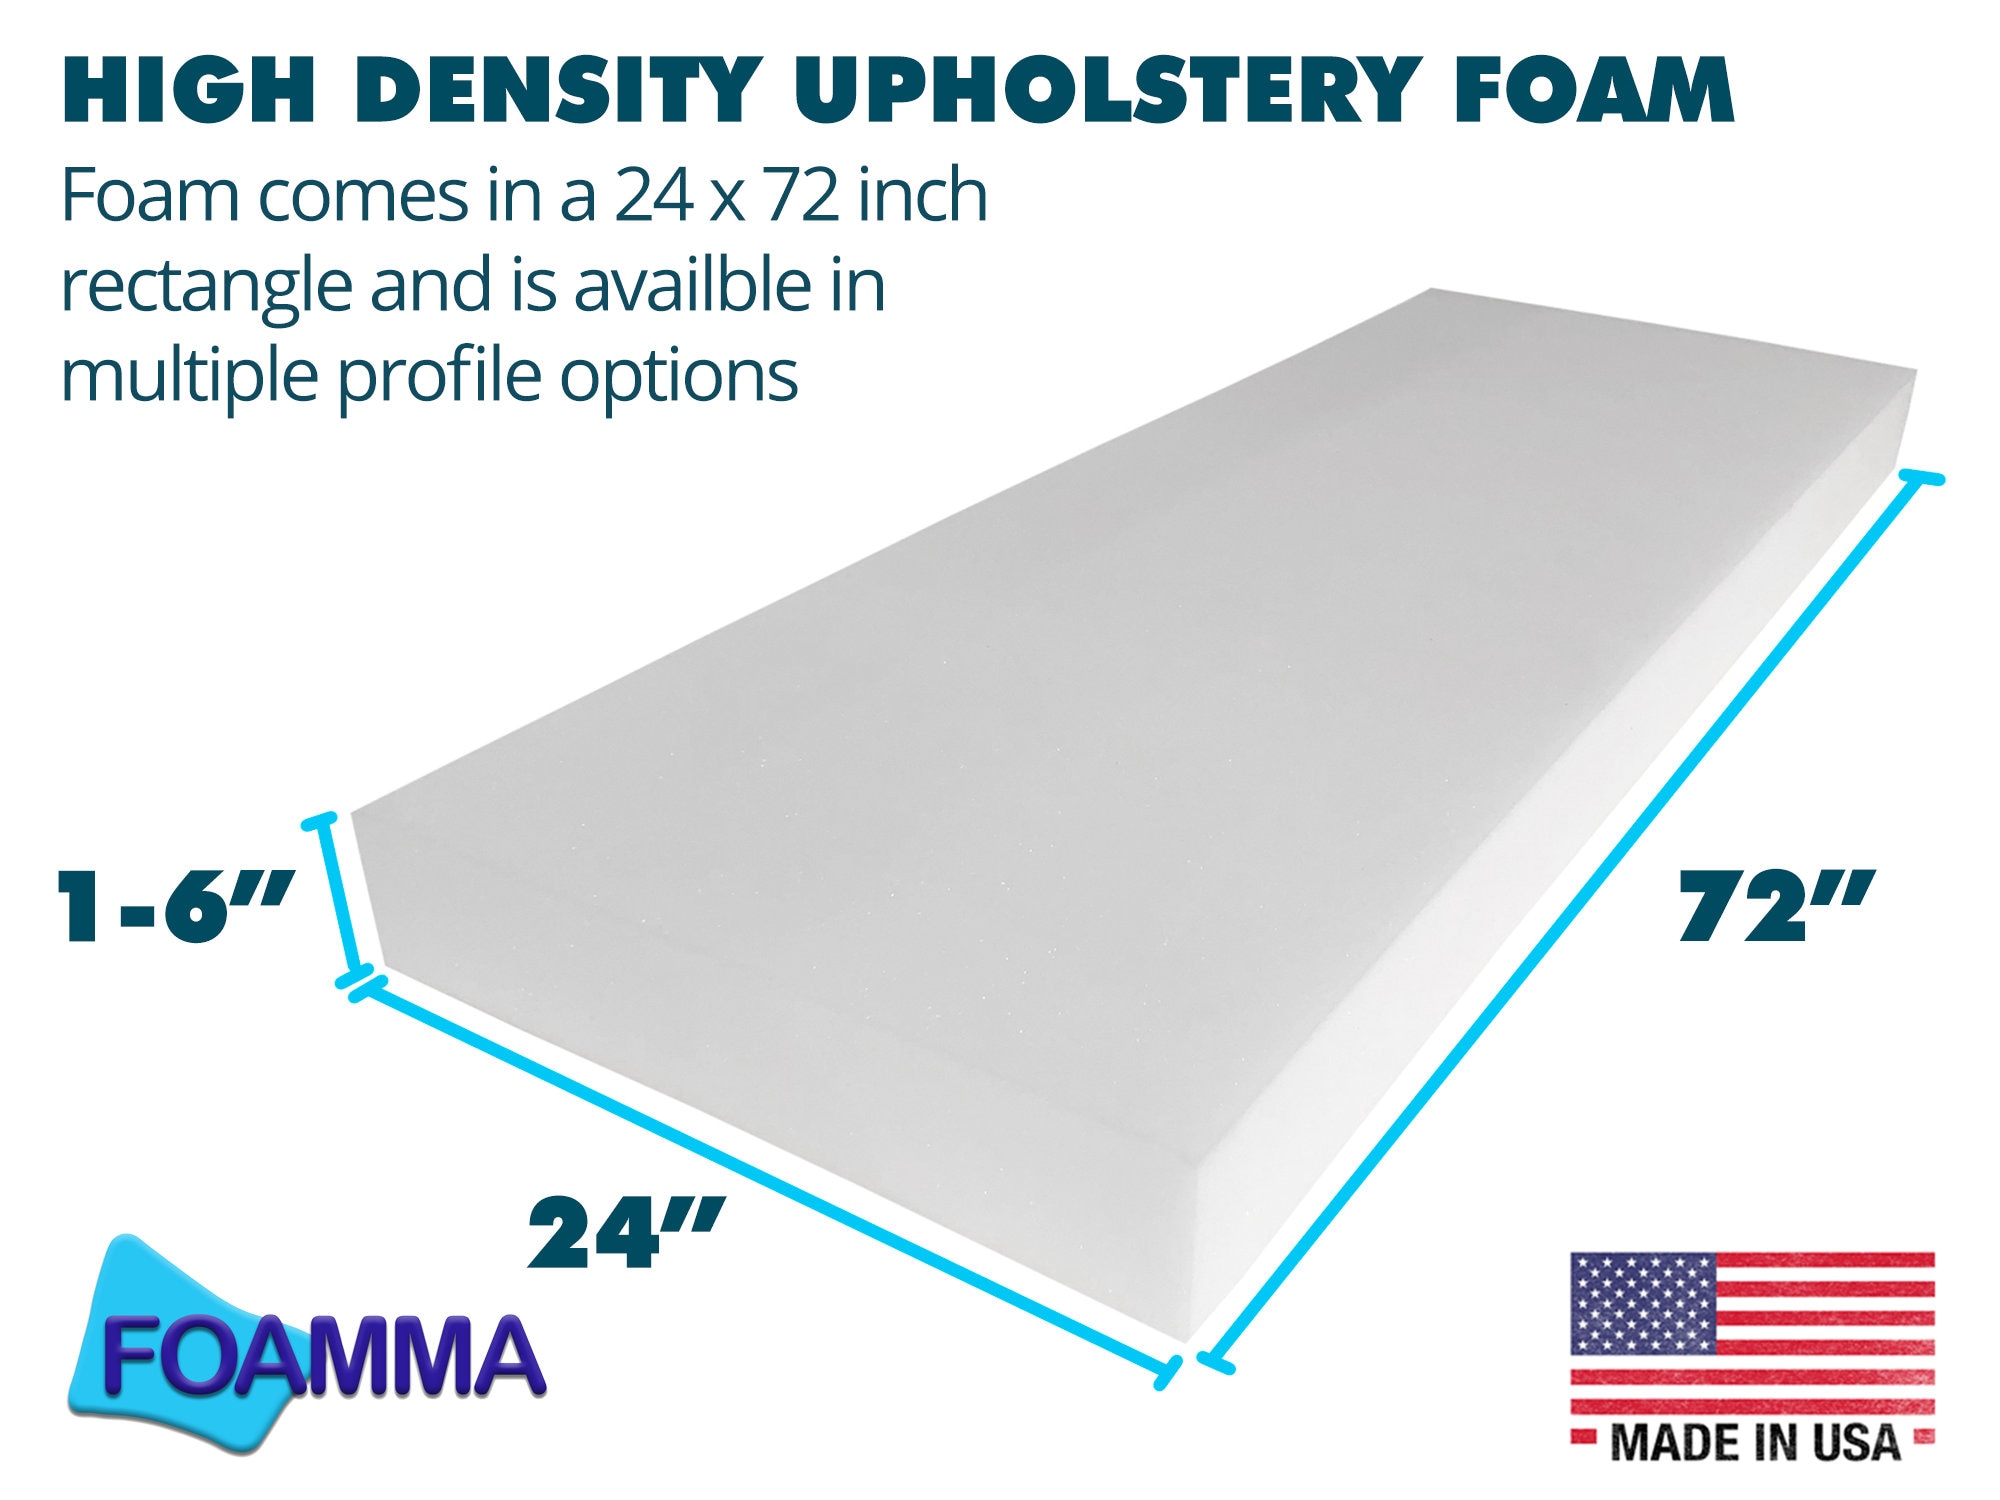  Foamma 1 x 24 x 26 High Density Upholstery Foam Padding,  Thick-Custom Pillow, Chair, and Couch Cushion Replacement Foam, Craft Foam Upholstery  Supplies, Foam Pad for Cushions and Seat Repair 